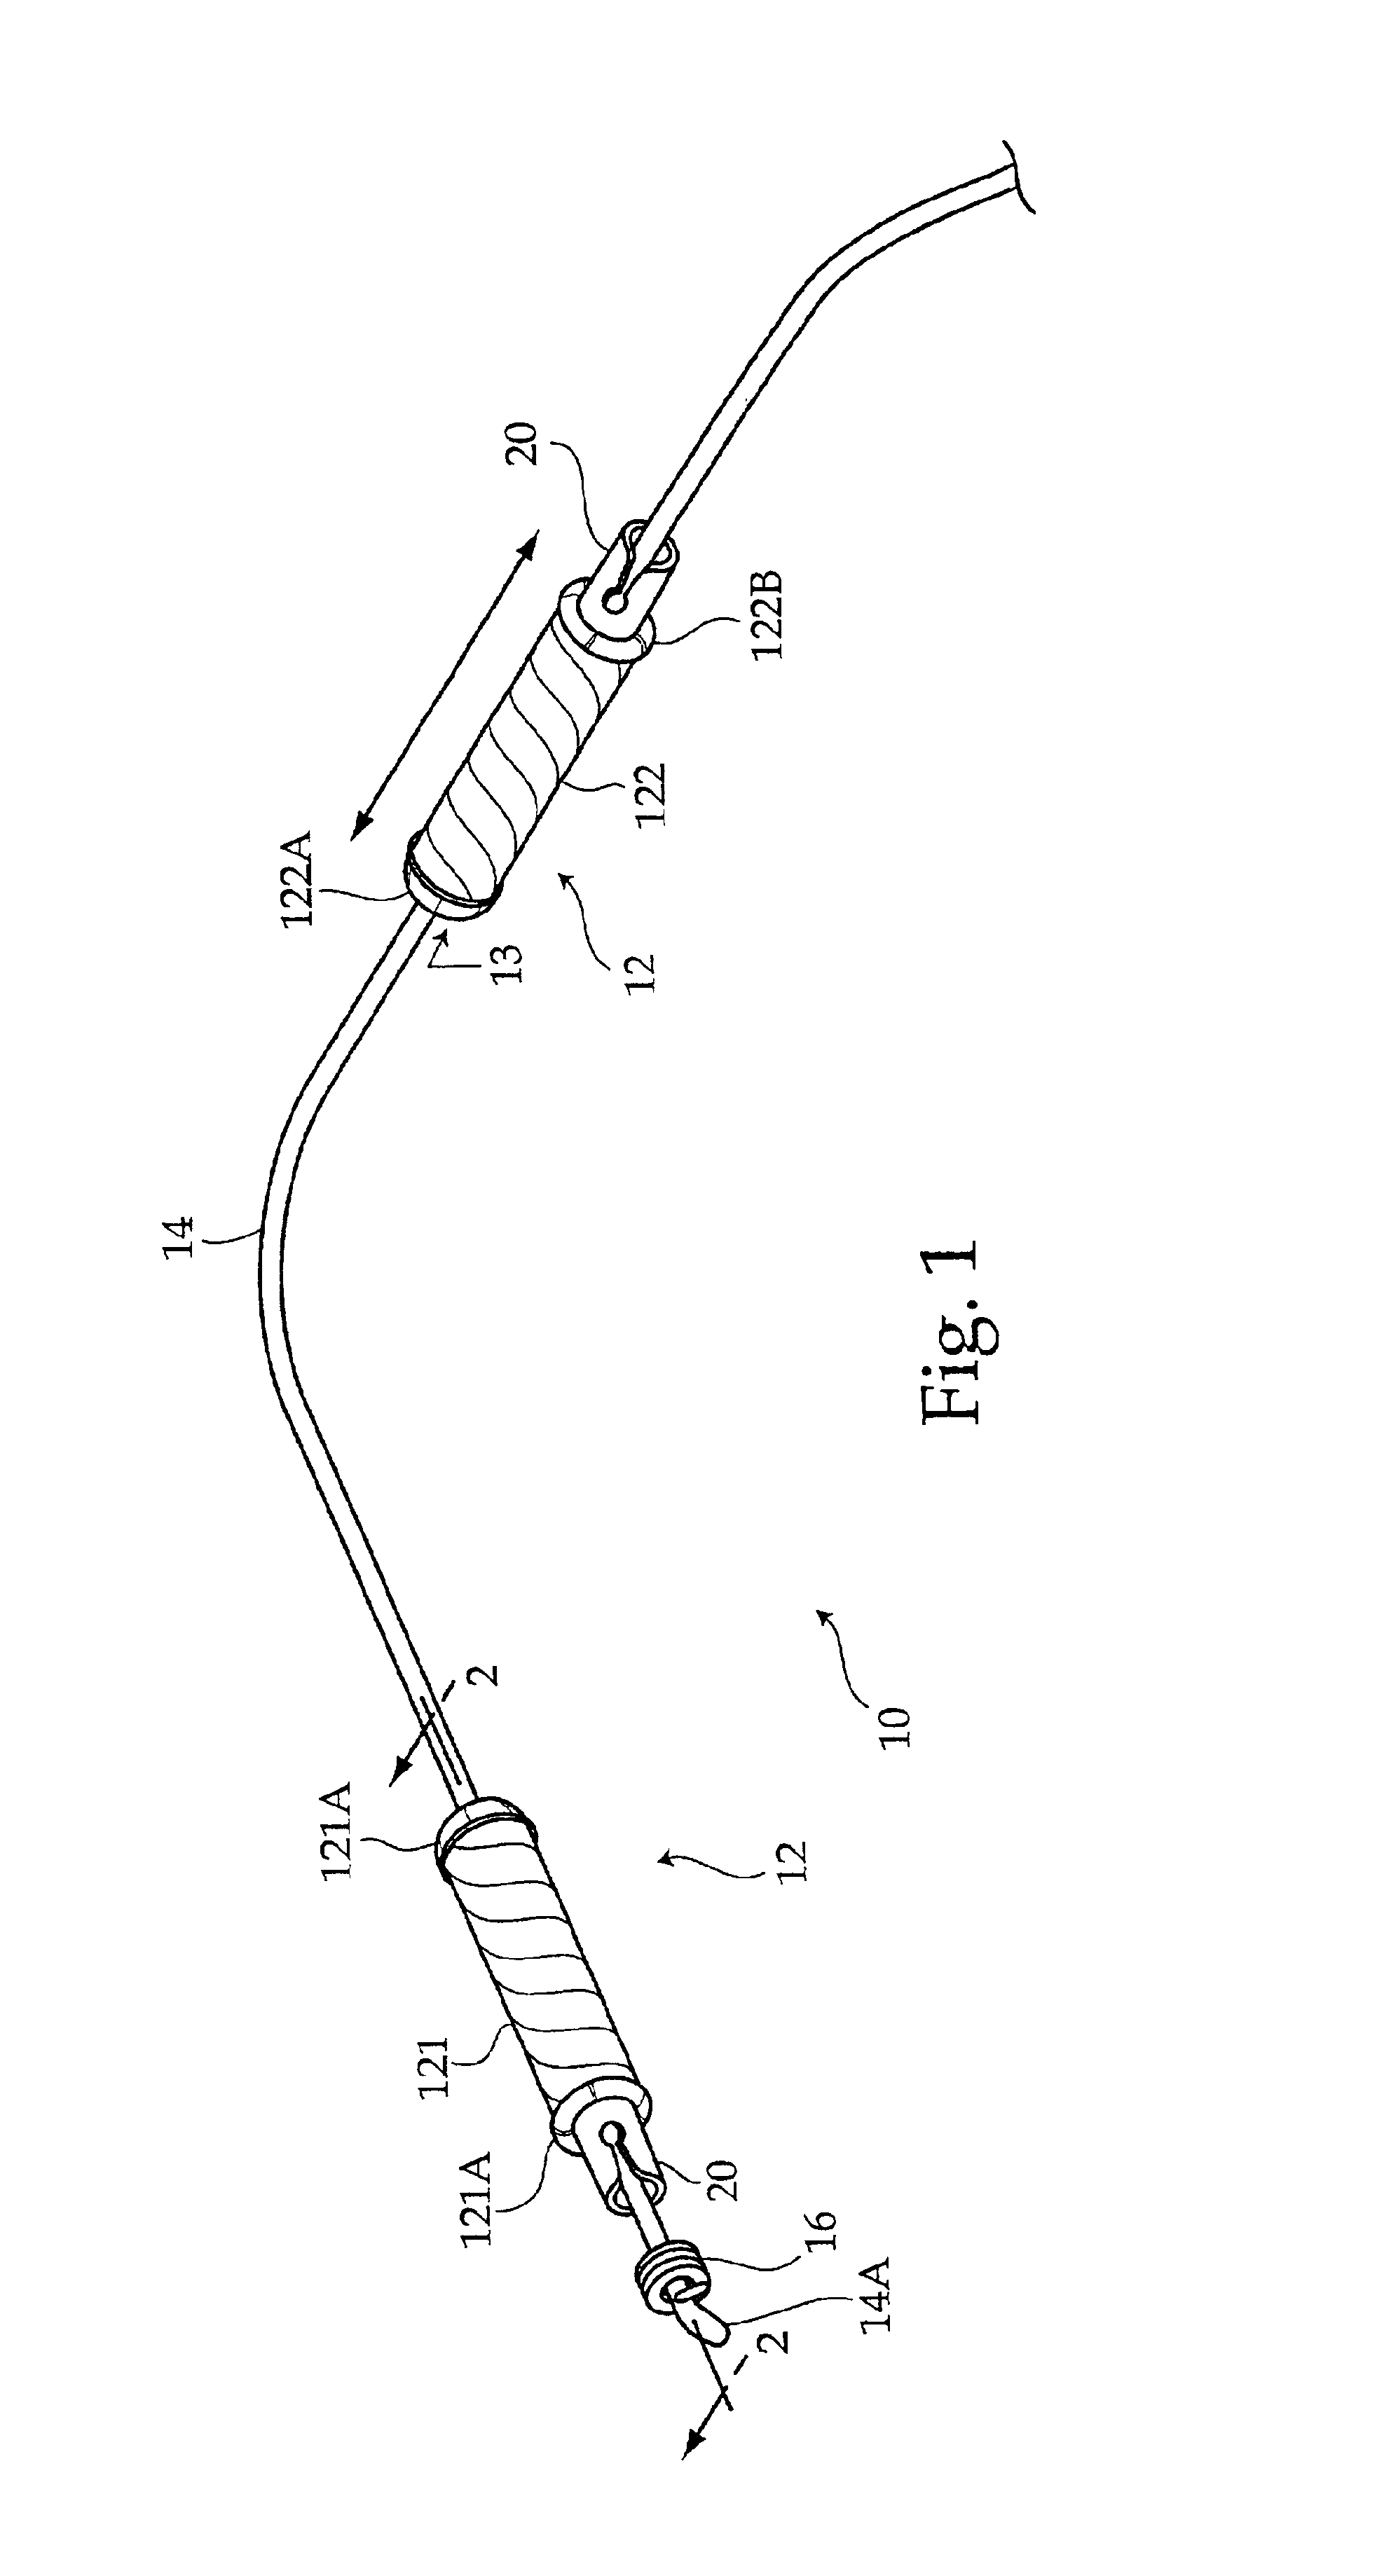 Exercise device with integrated handle and stopping device